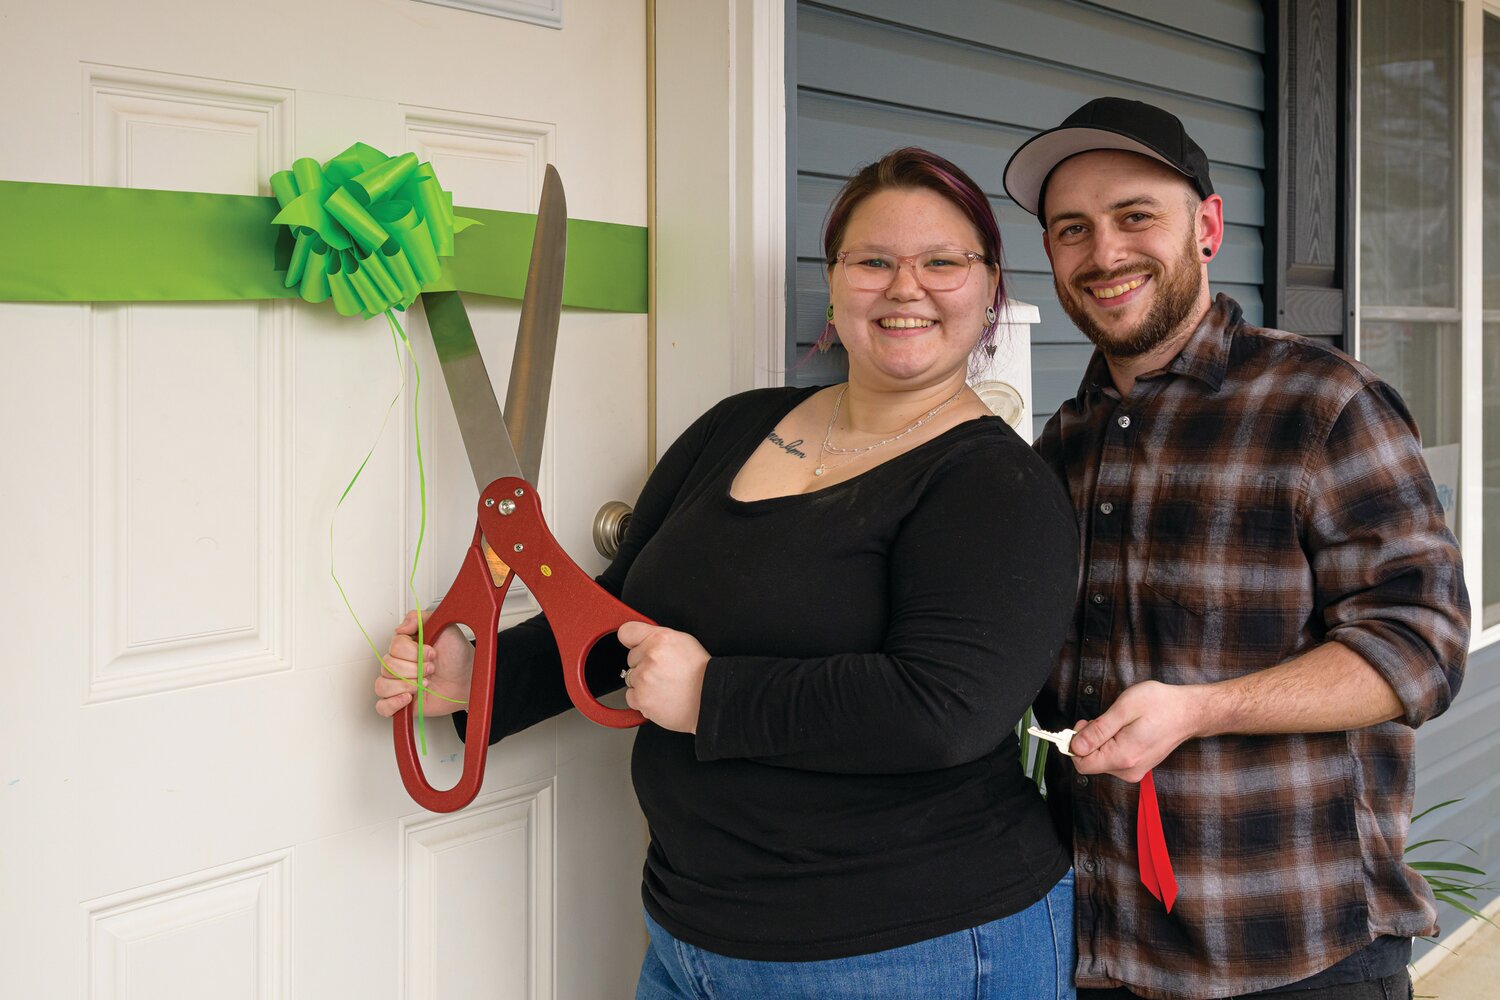 Tyler and Angelica cut the ceremonial ribbon on their new home in Croydon, the fruits of their work in the Homeownership Program of Habitat for Humanity Bucks County.